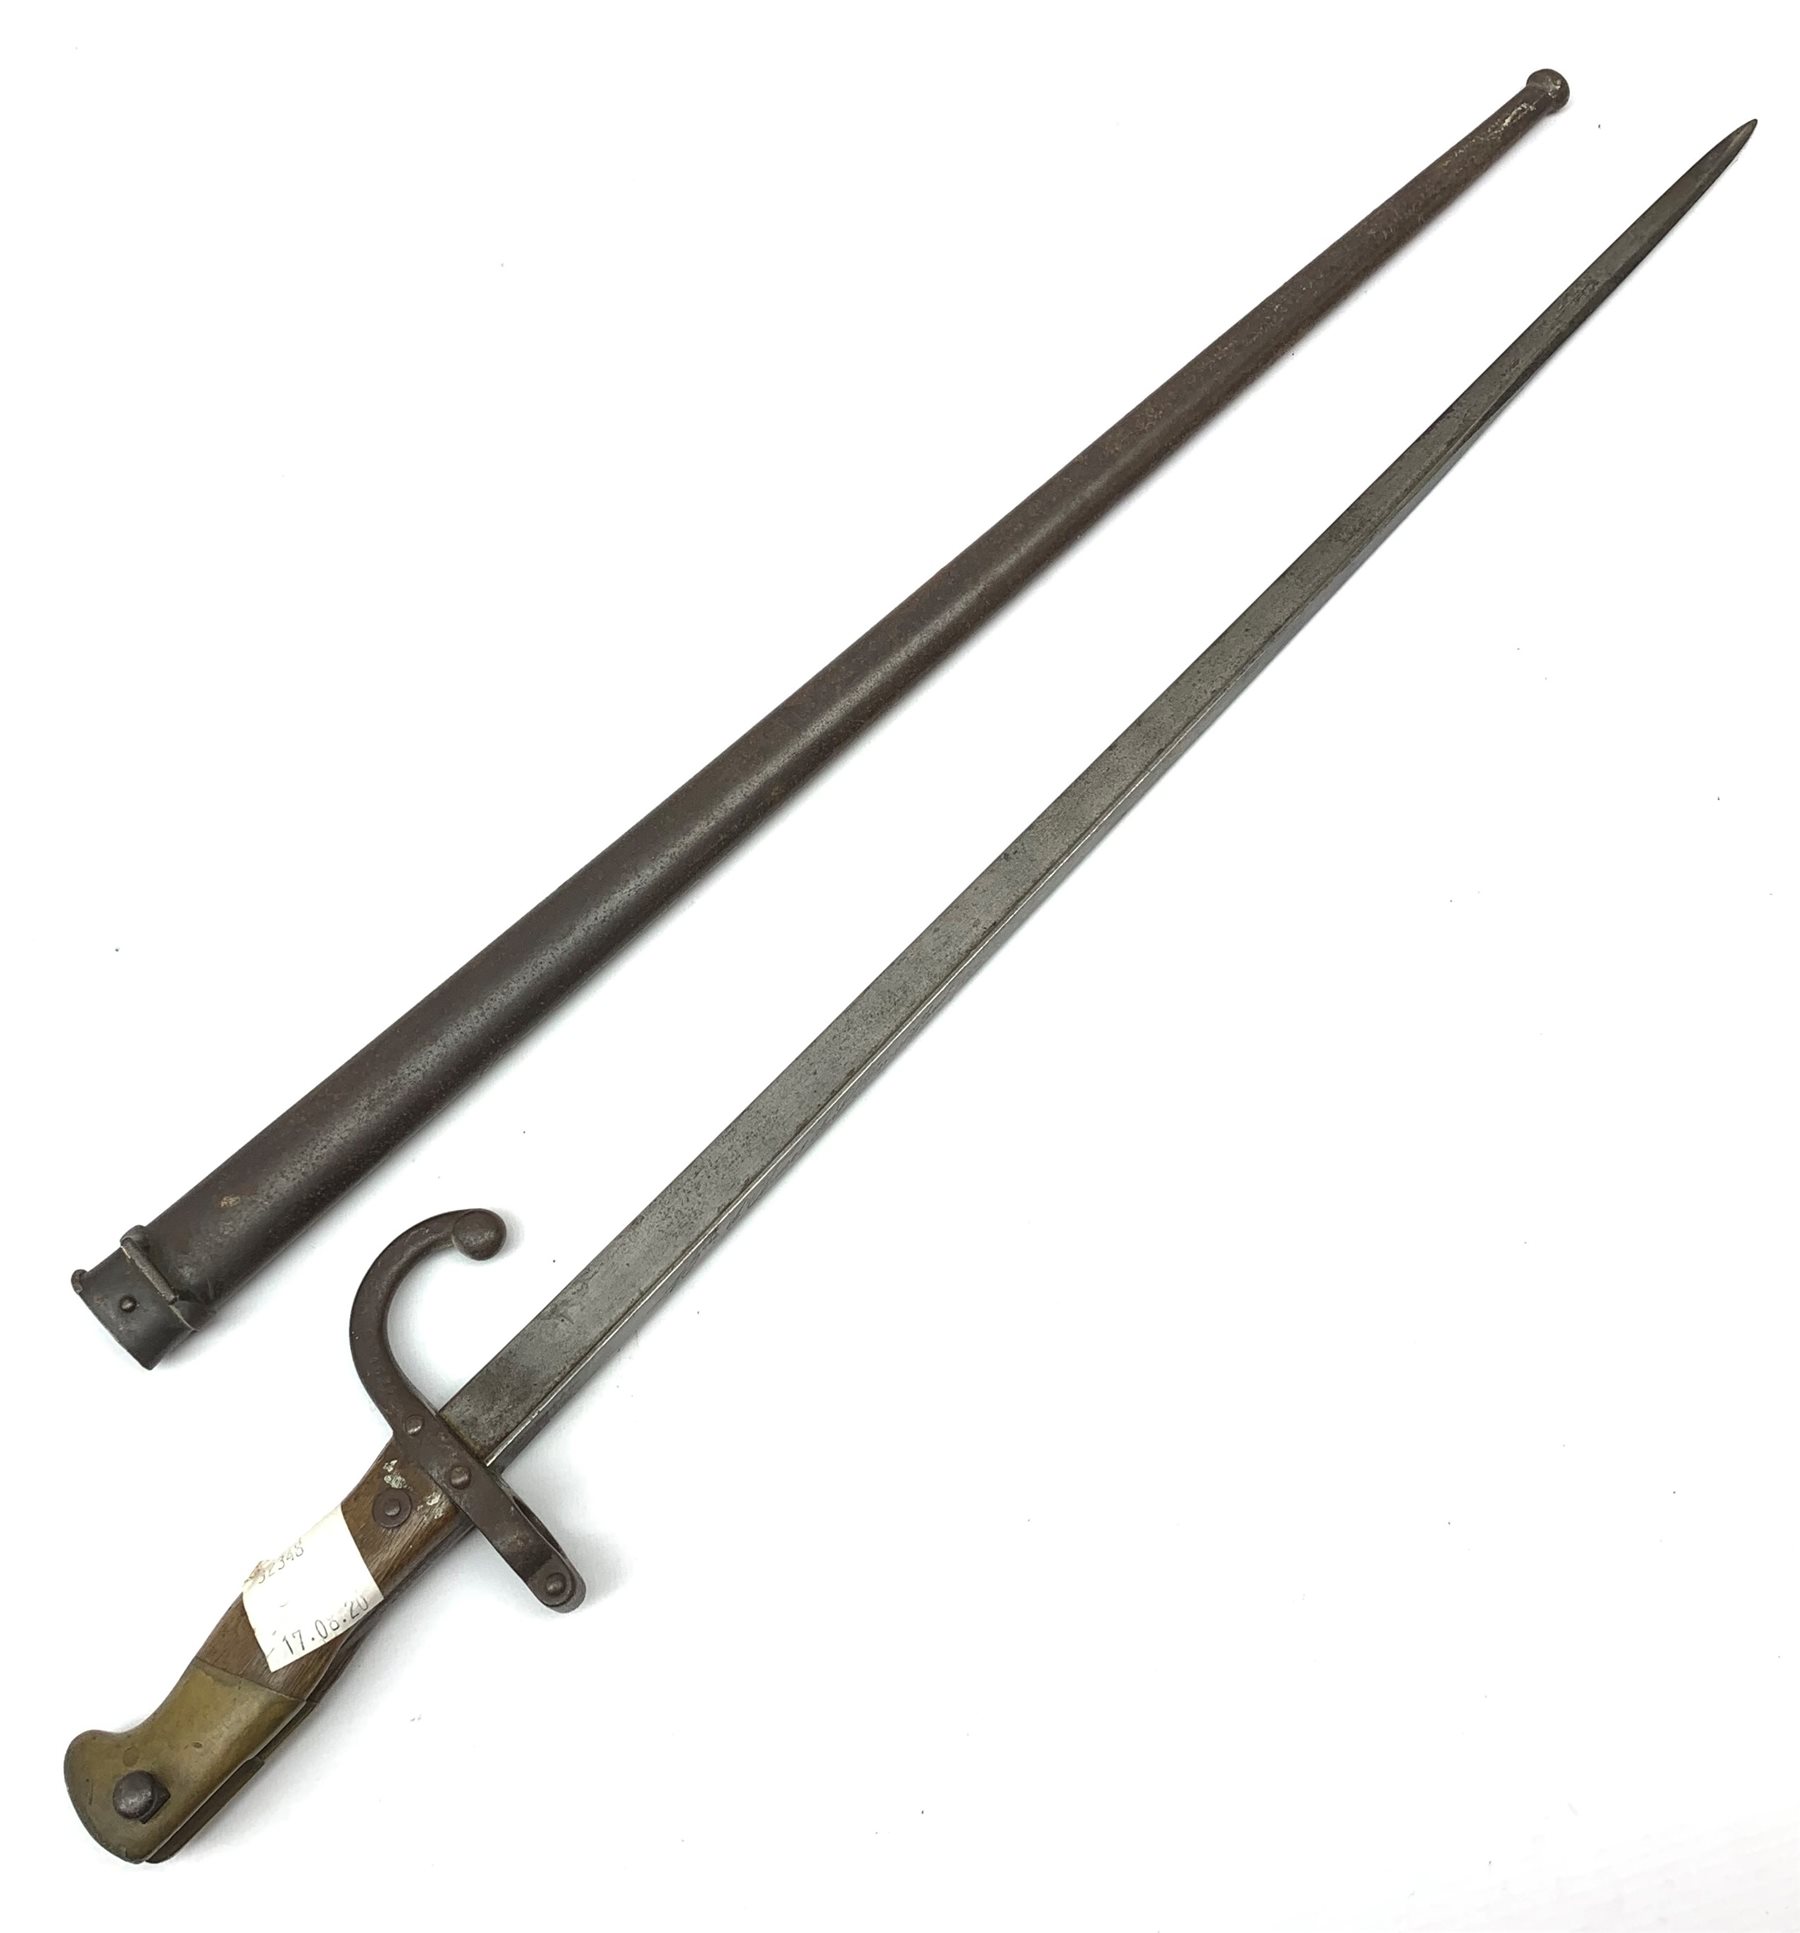 French Model 1874 Epee bayonet Guns, in inscribed overall de Etienne steel Sporting L66cm St. Country Janvier scabbard \'Mre. Militaria d\'Armes blade Taxidermy 1880\', Pursuits, steel - & 52cm the